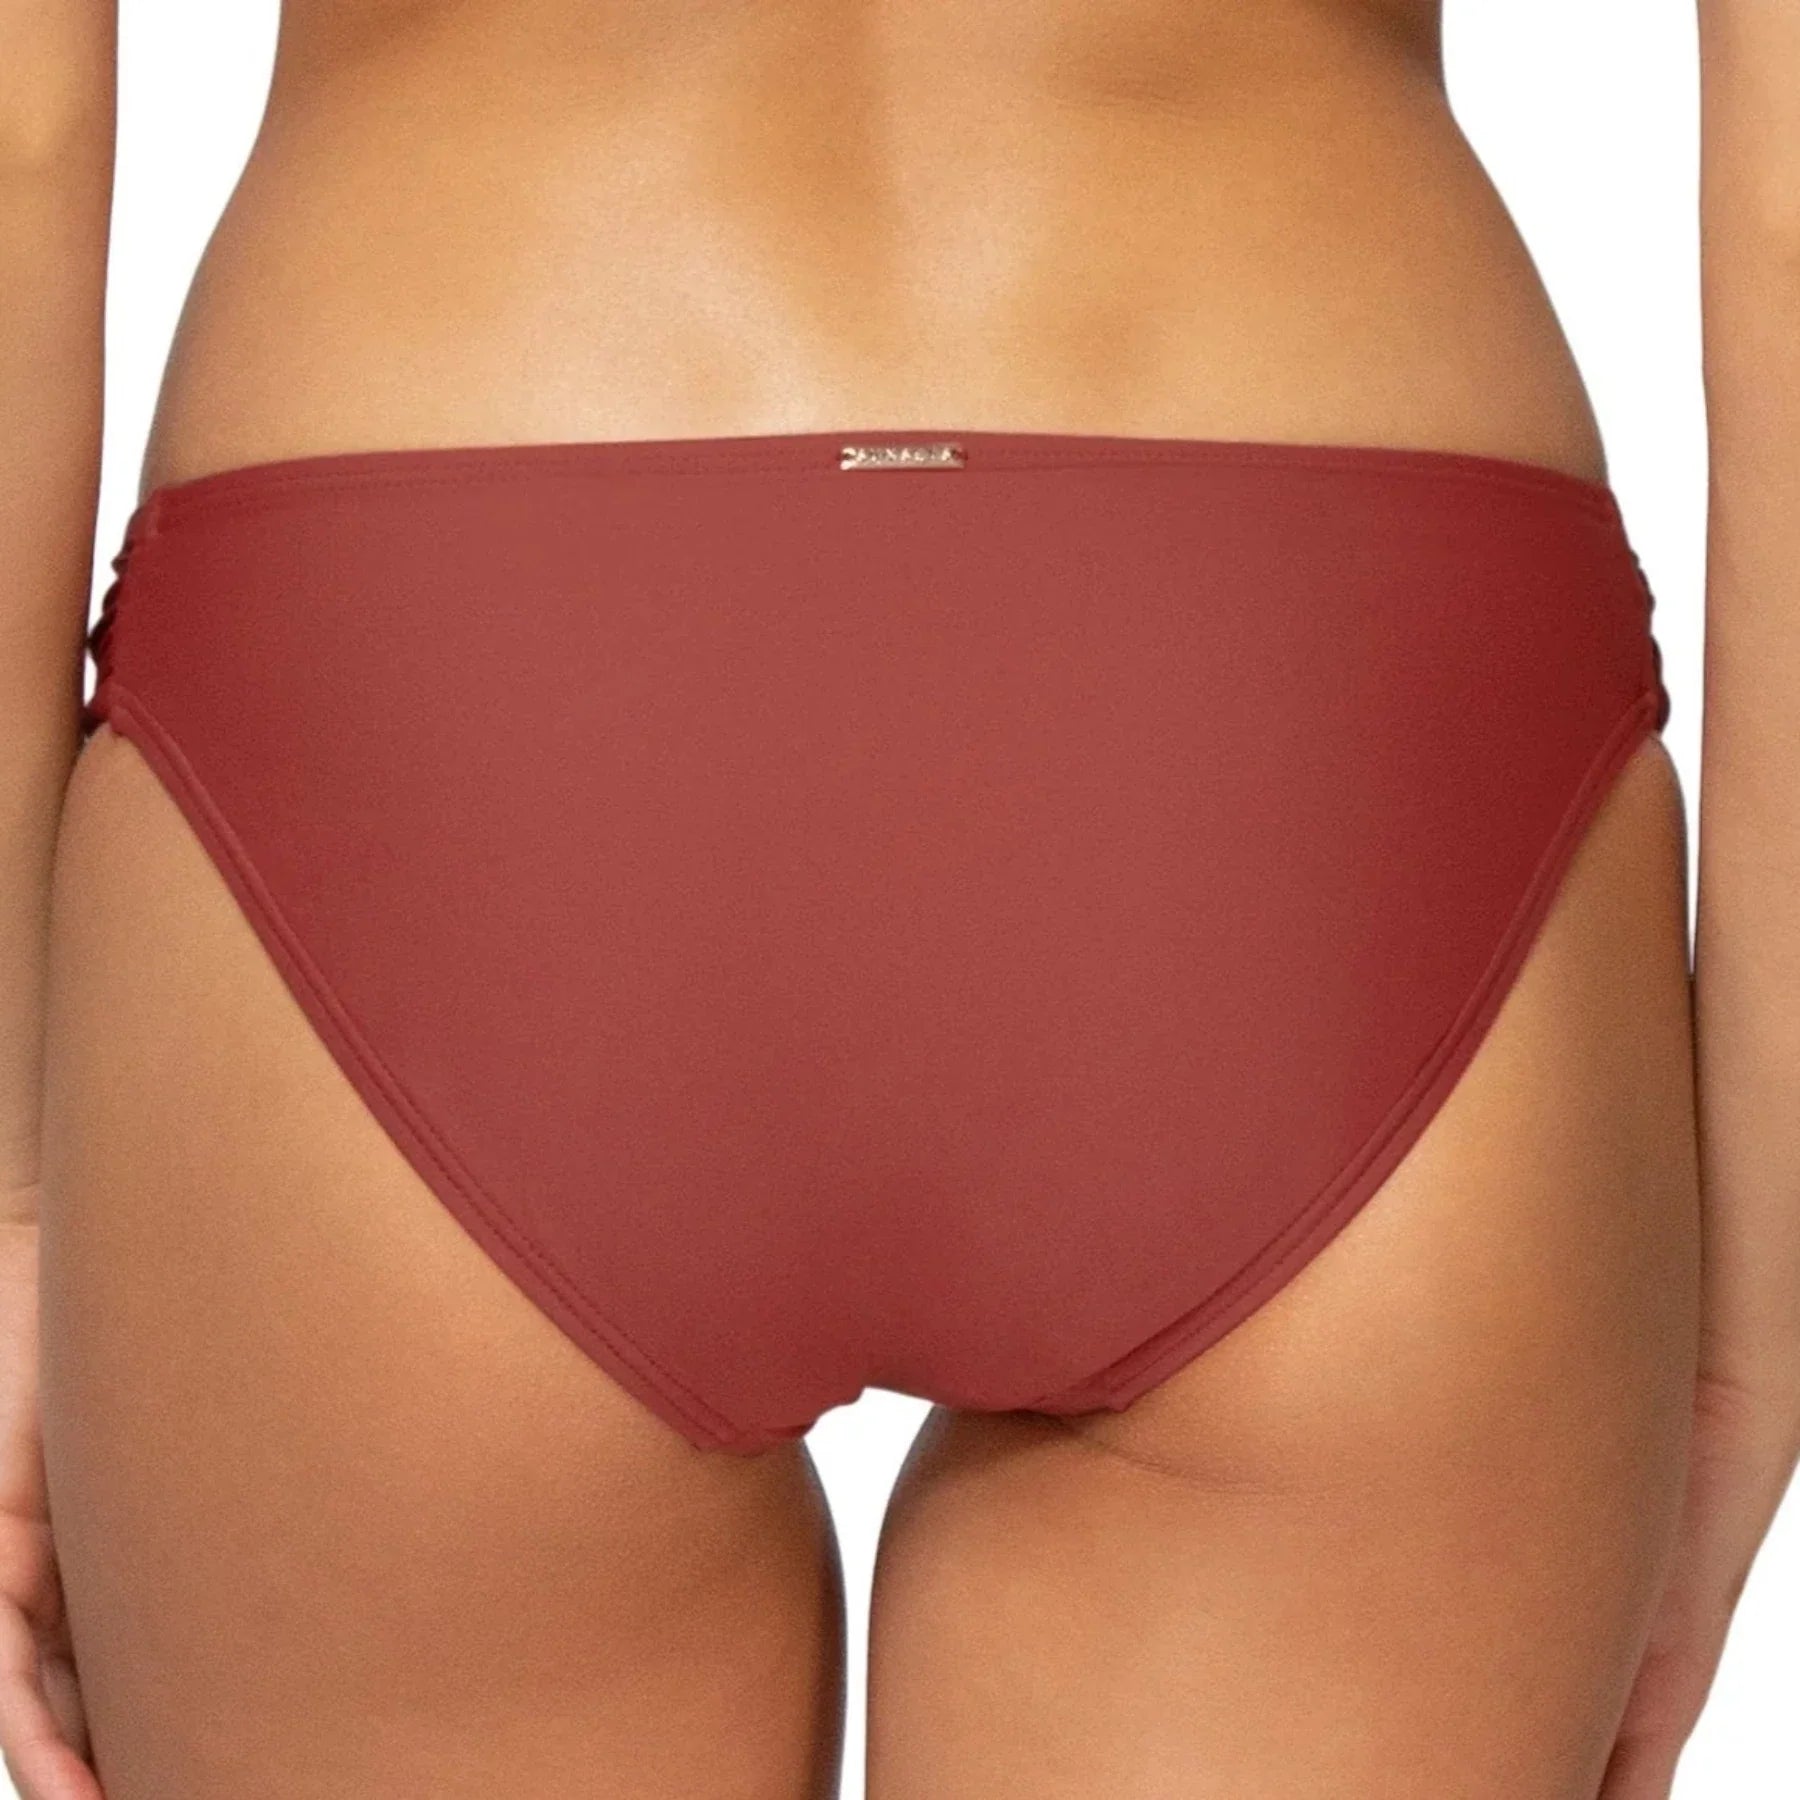 Femme Fatale Hipster 22B - Tuscan Red